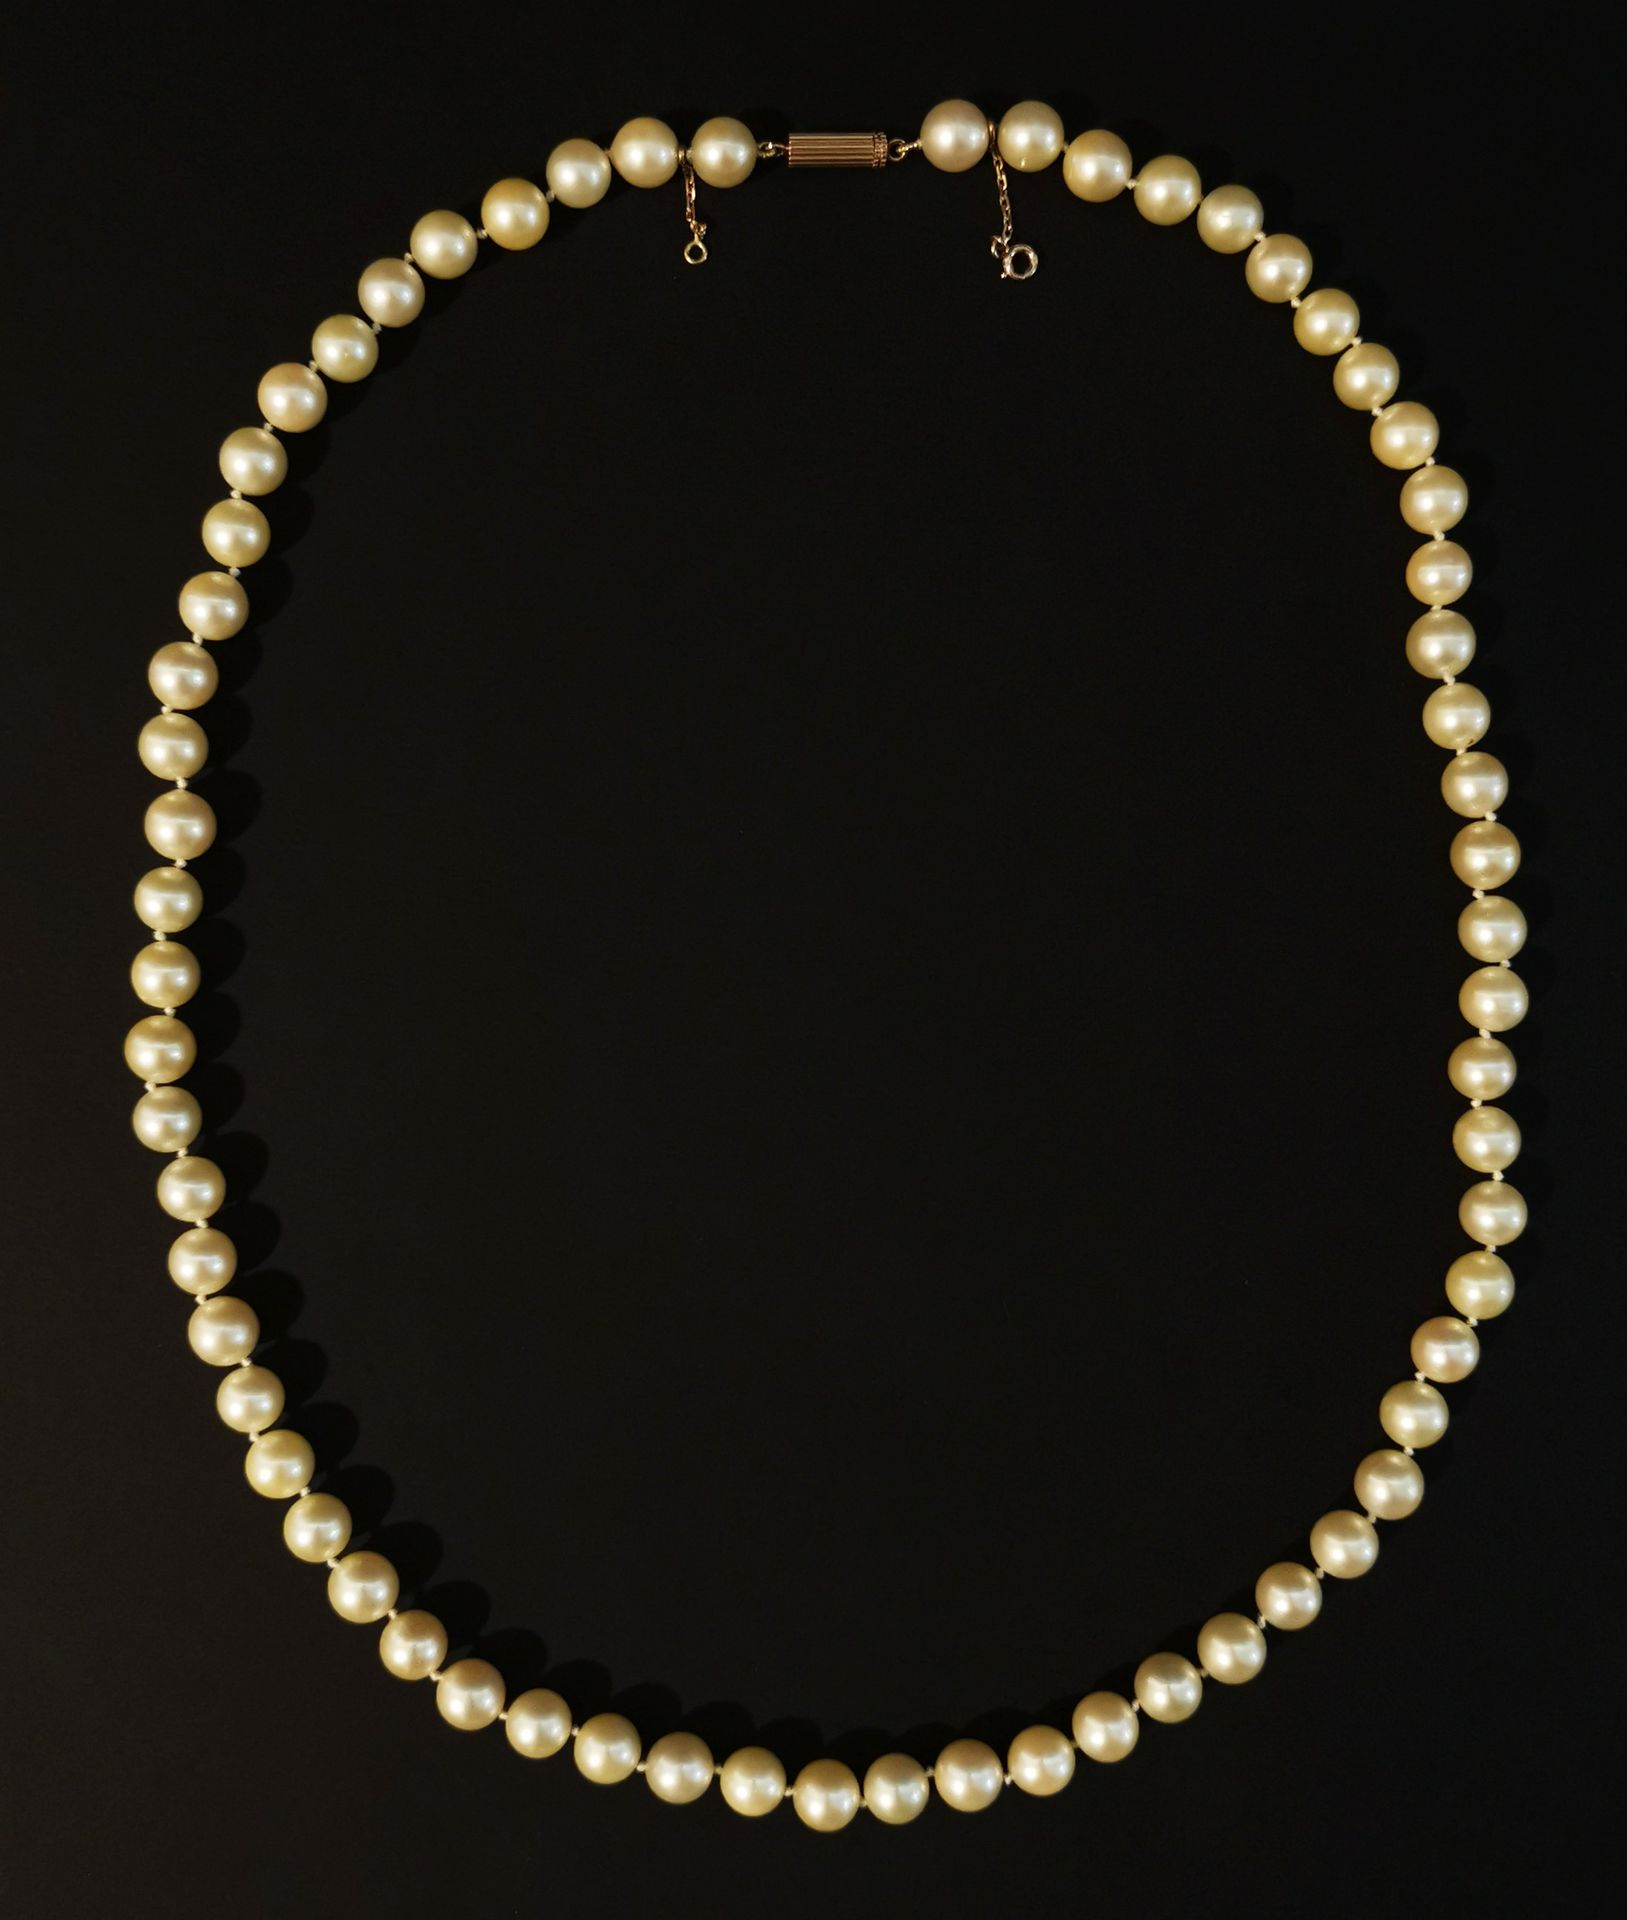 Null Necklace of pearls, clasp striated in gold. Gross weight: 55.2g.